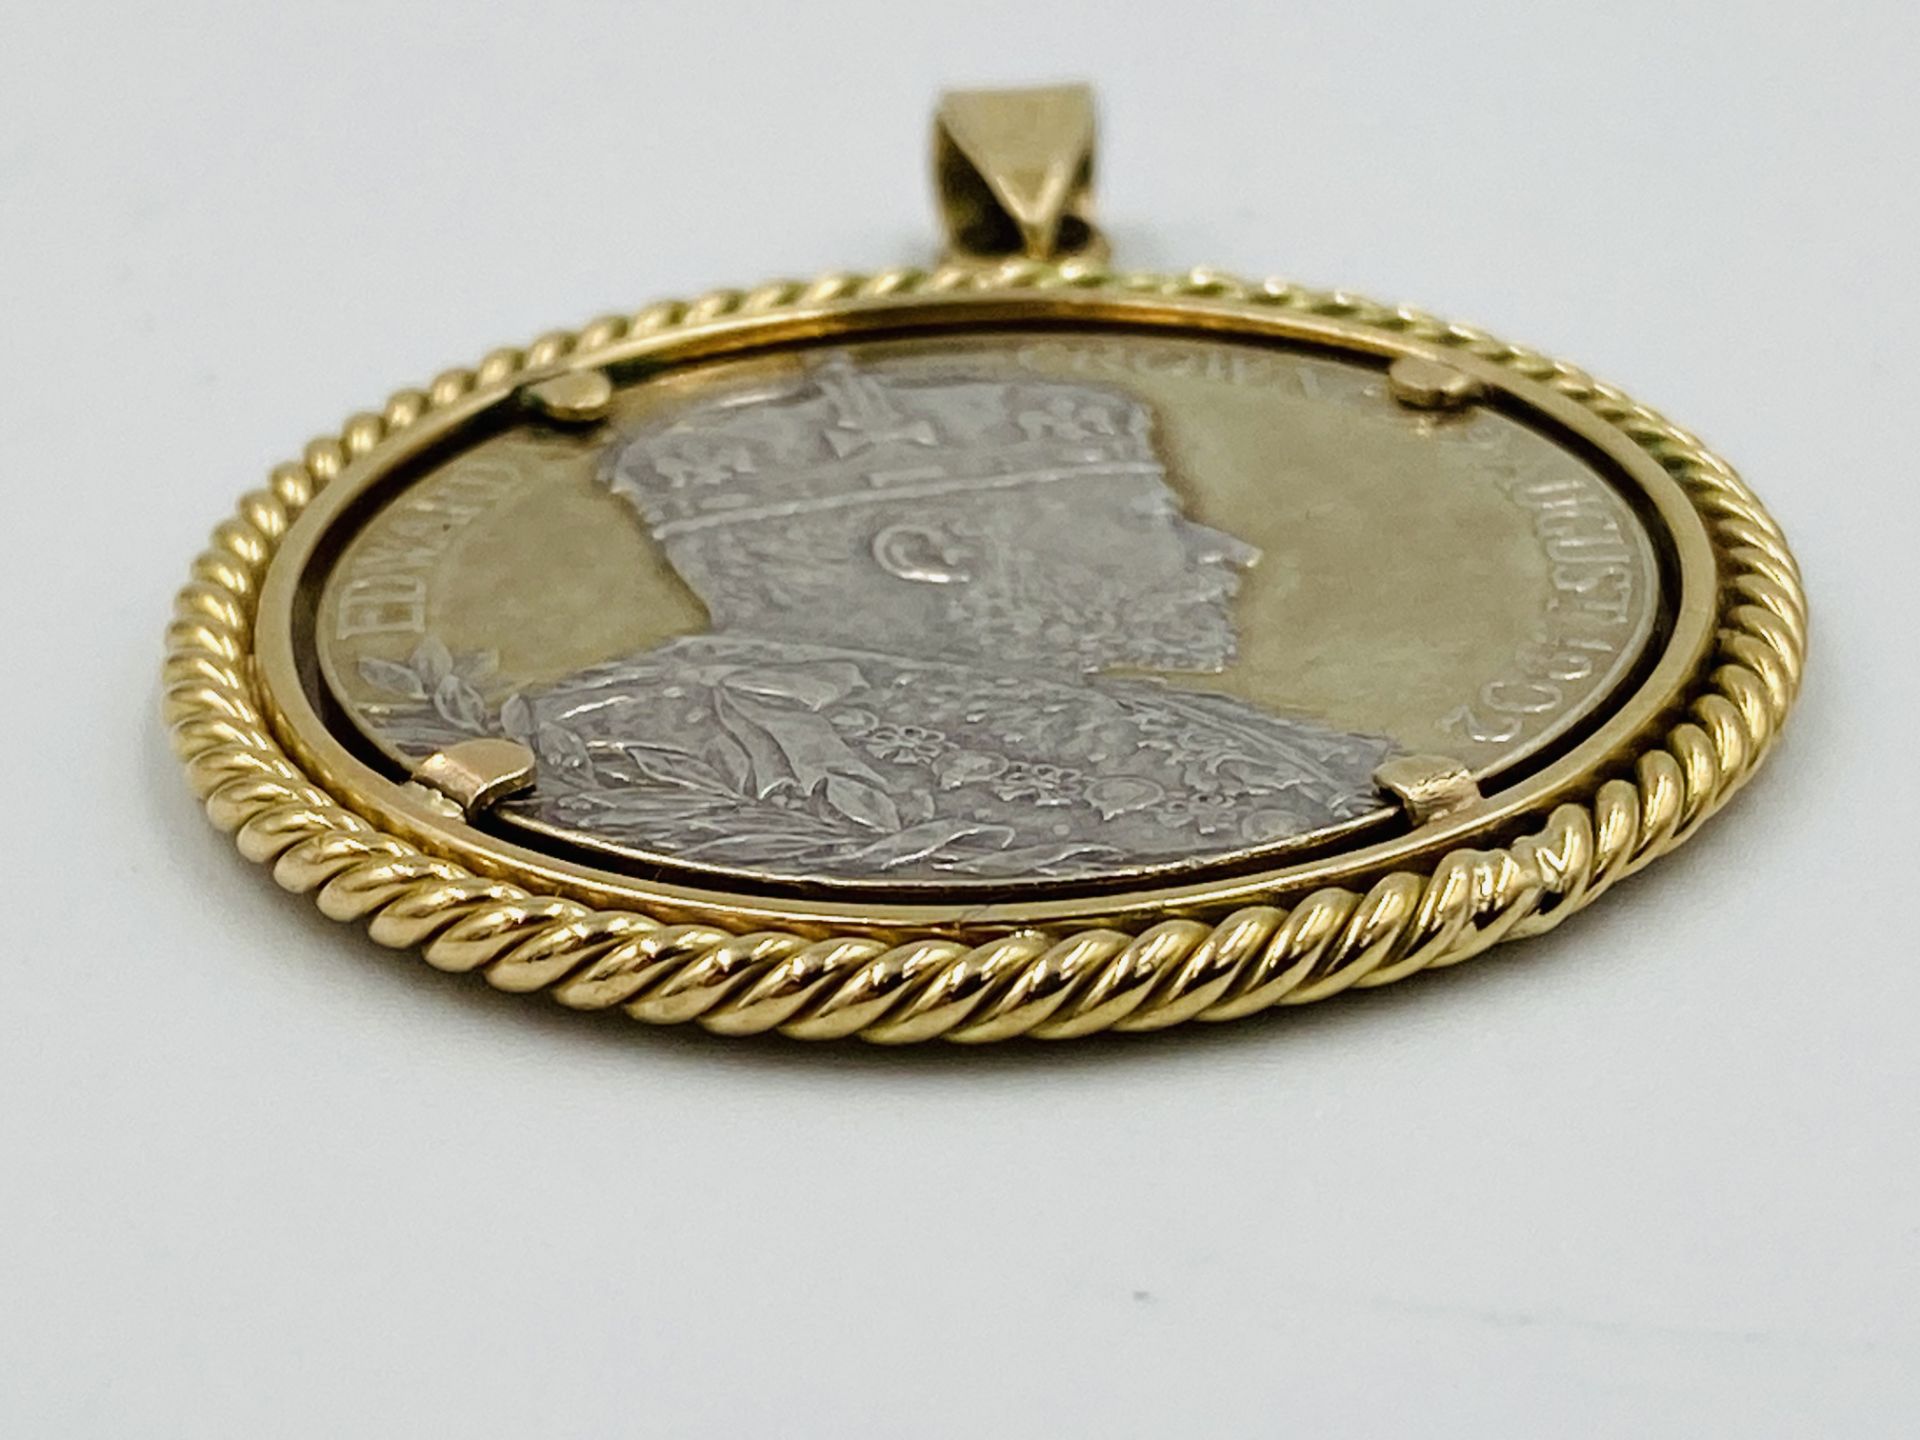 King Edward VII silver coronation medal in 9ct gold pendant - Image 3 of 3